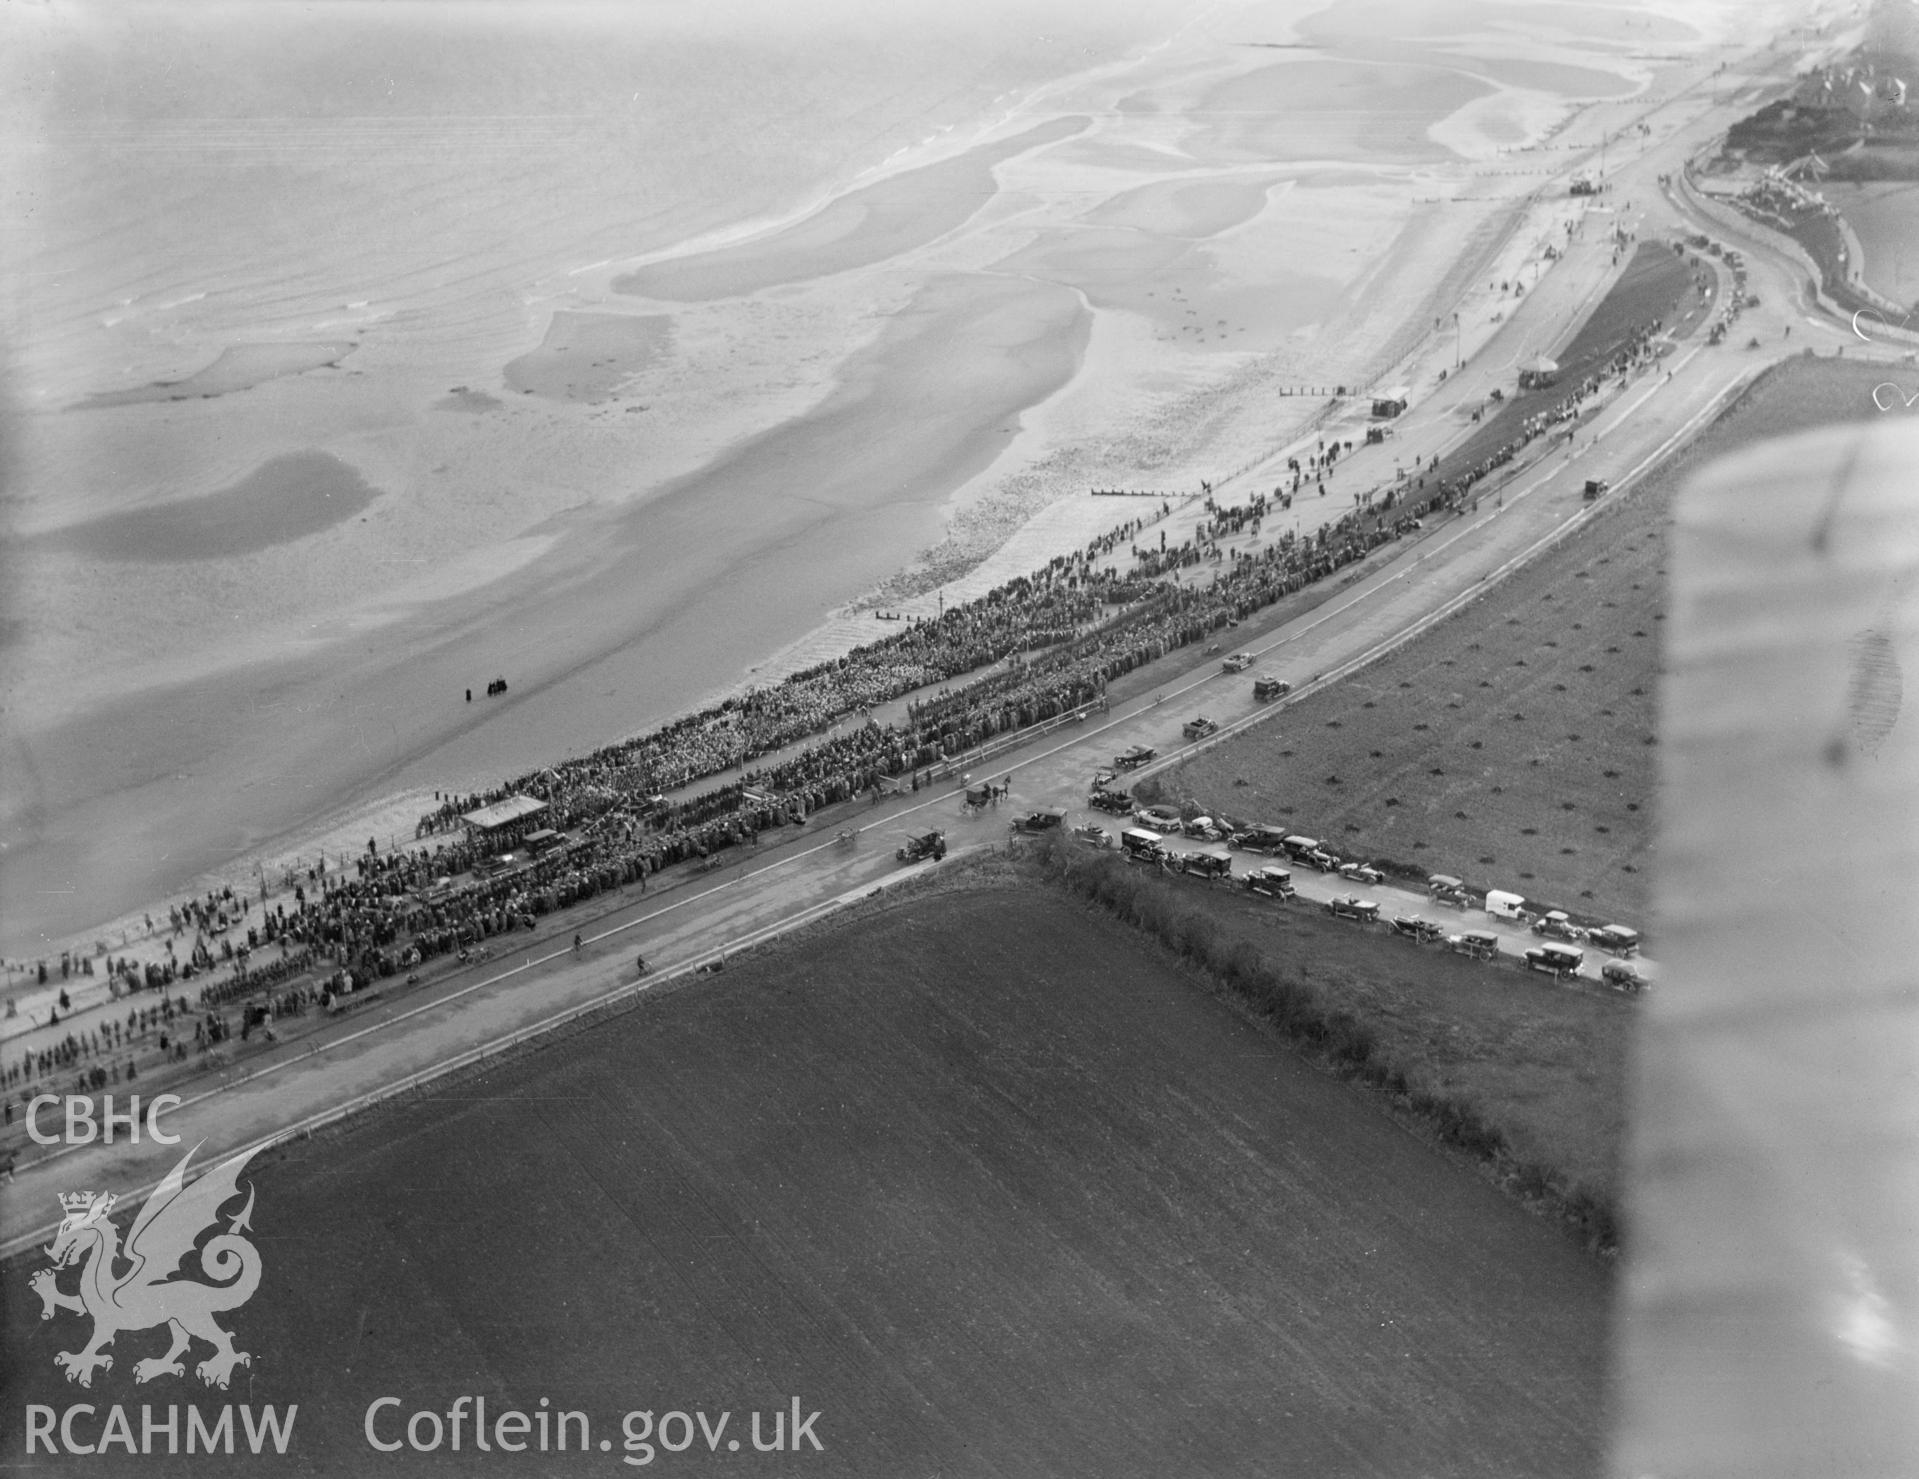 Colwyn Bay showing distant view of ceremony and crowds during during the visit of the Prince of Wales (later Edward VIII) in November 1923, oblique aerial view. 5?x4? black and white glass plate negative.